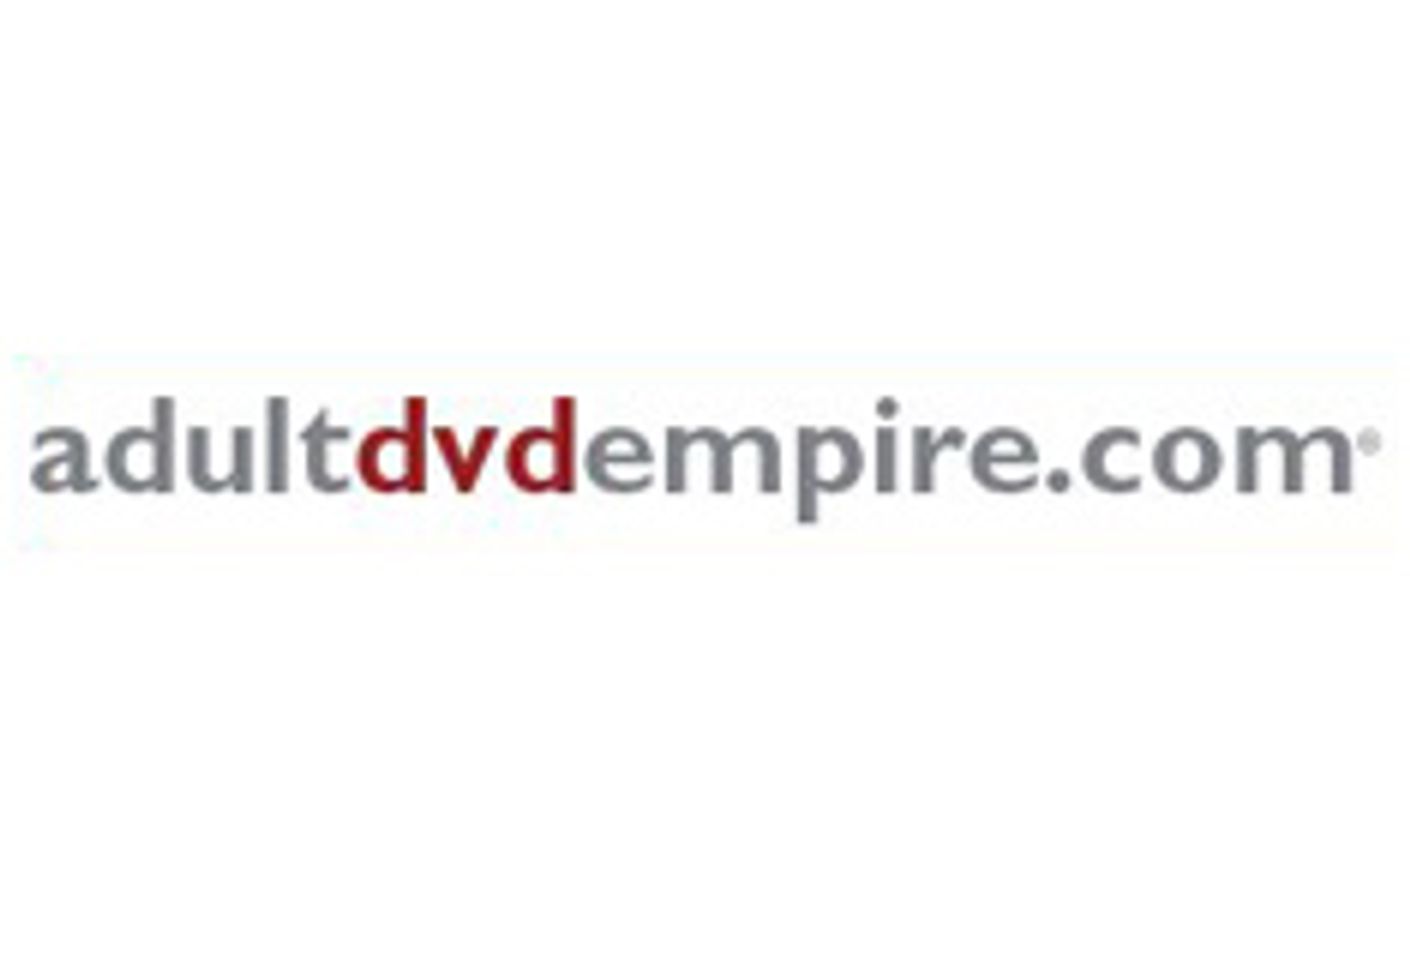 AdultDVDEmpire.com Wins Best Retail Site Award for 7th Time